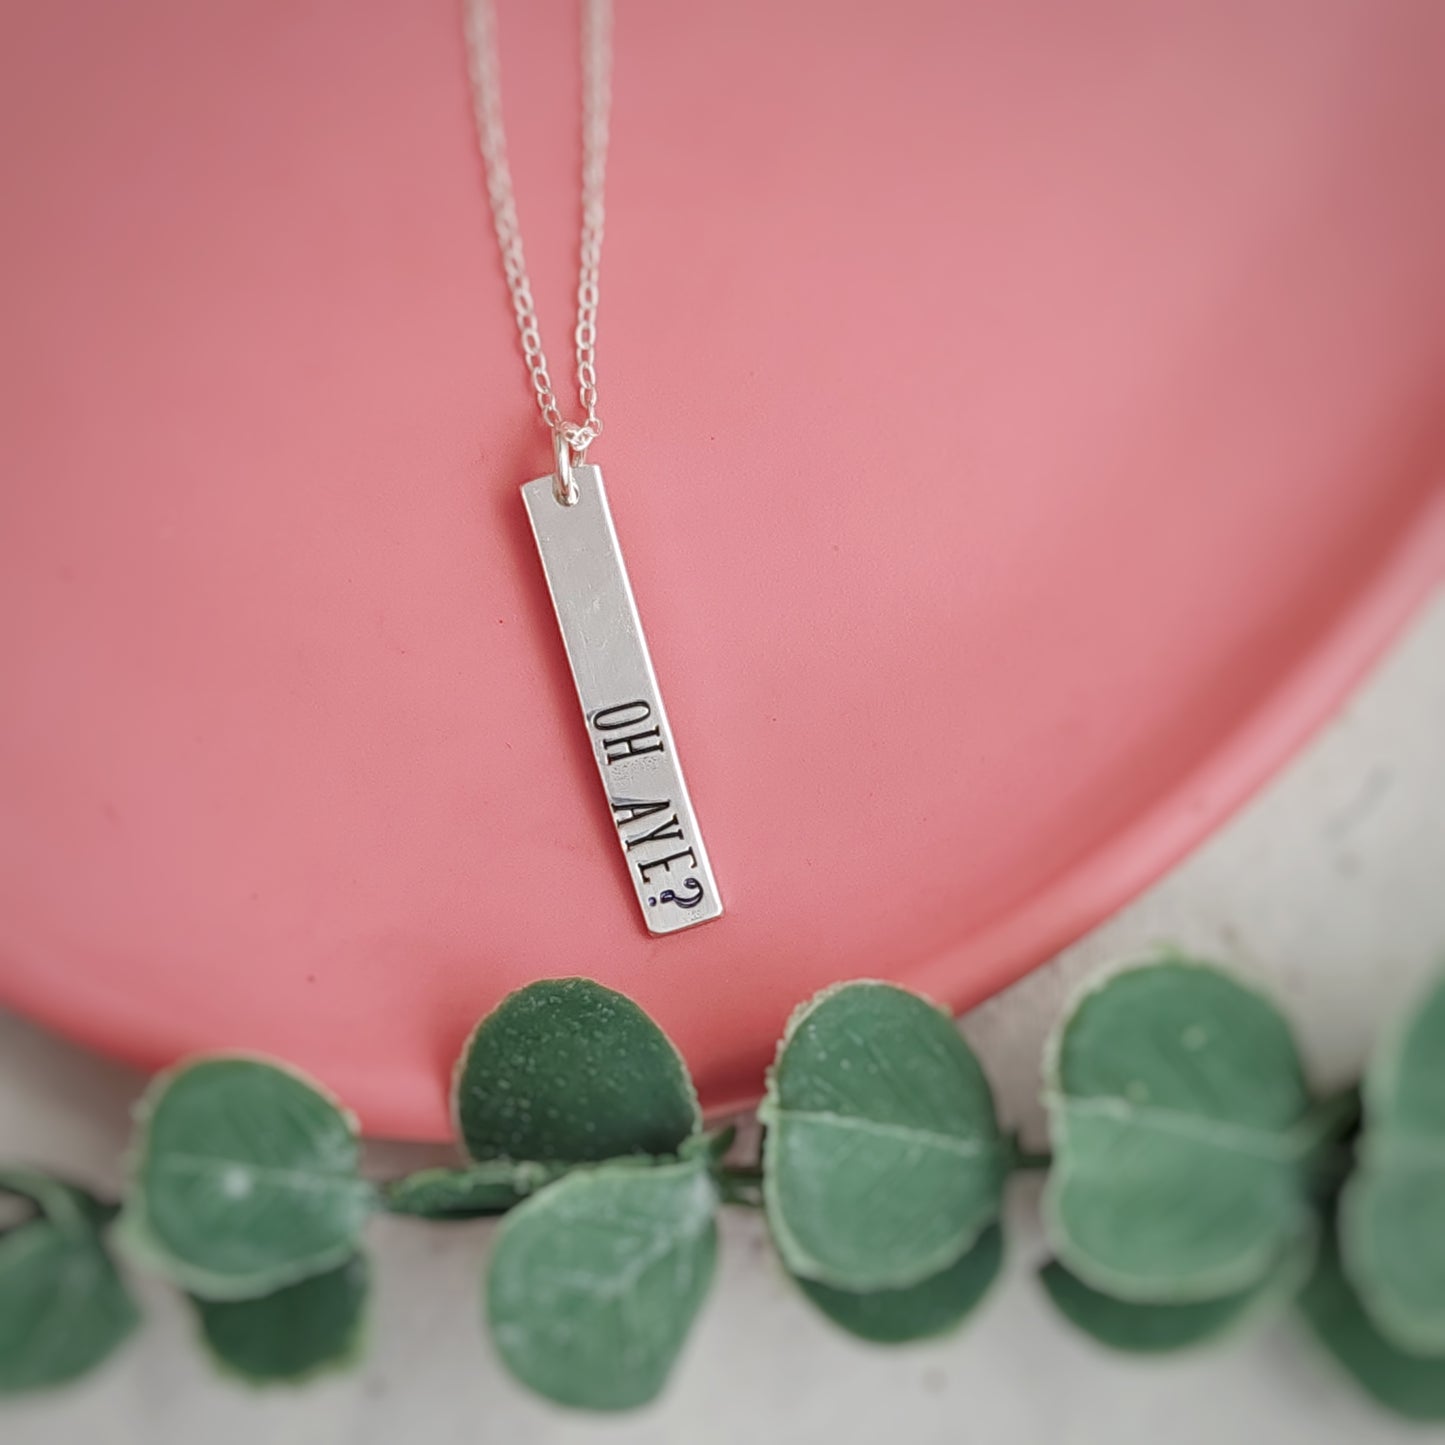 Yorkshire Sayings Necklace - Oh Aye?